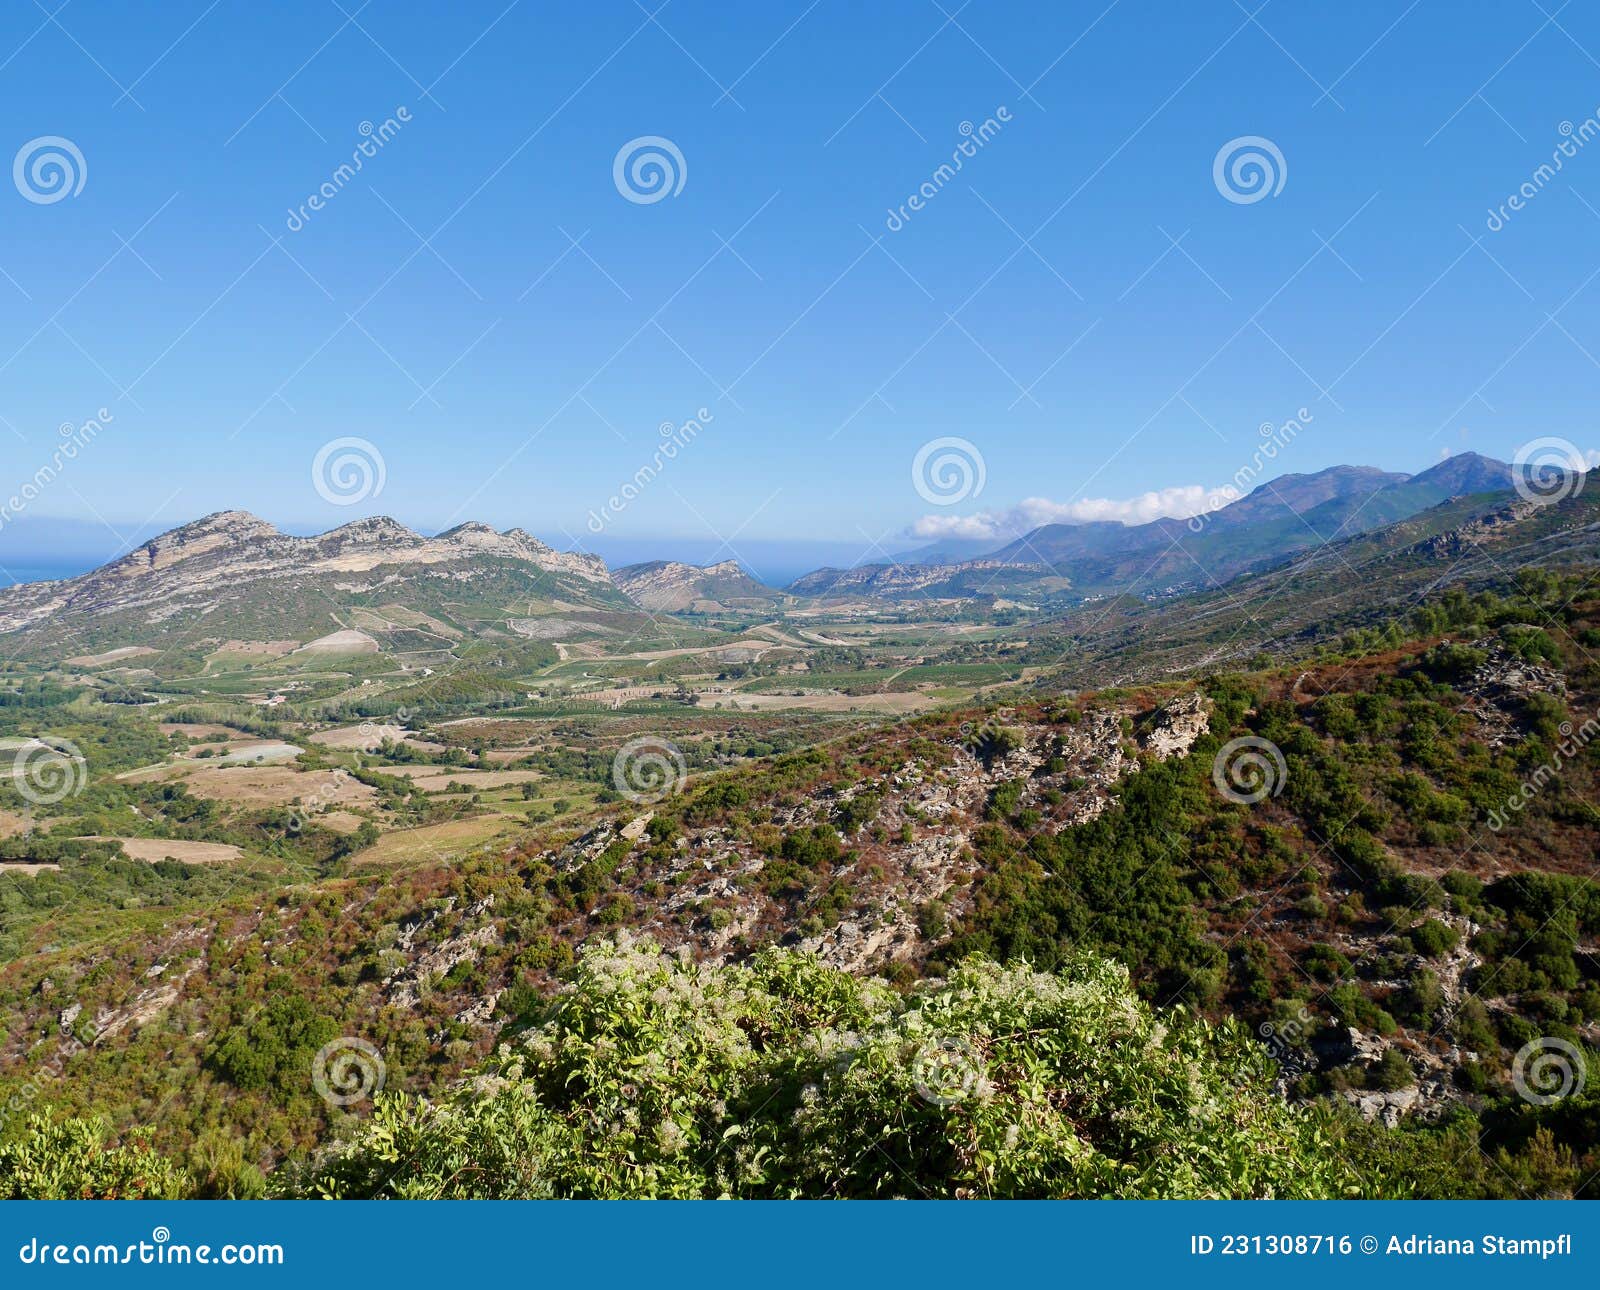 aerial view of vineyards in patrimonio hills, corsica, france.